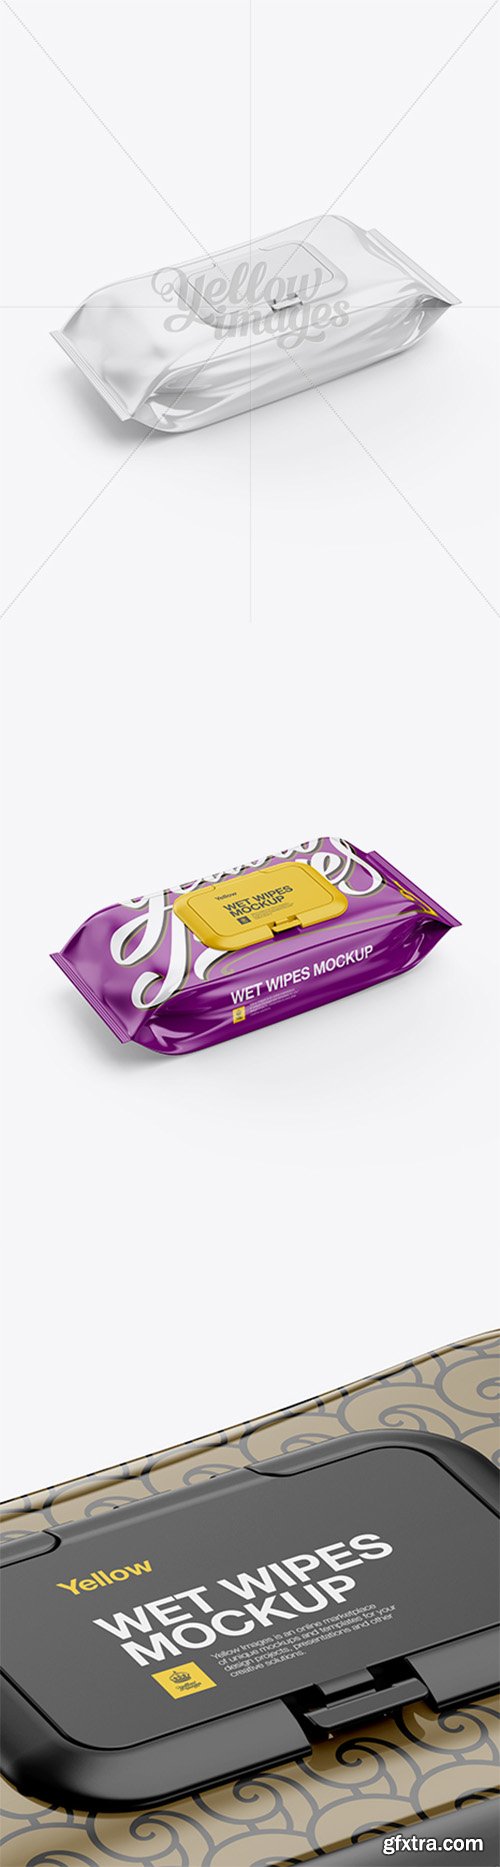 Wet Wipes Pack With Plastic Cap Mockup - Half Side View (High-Angle Shot) 17406